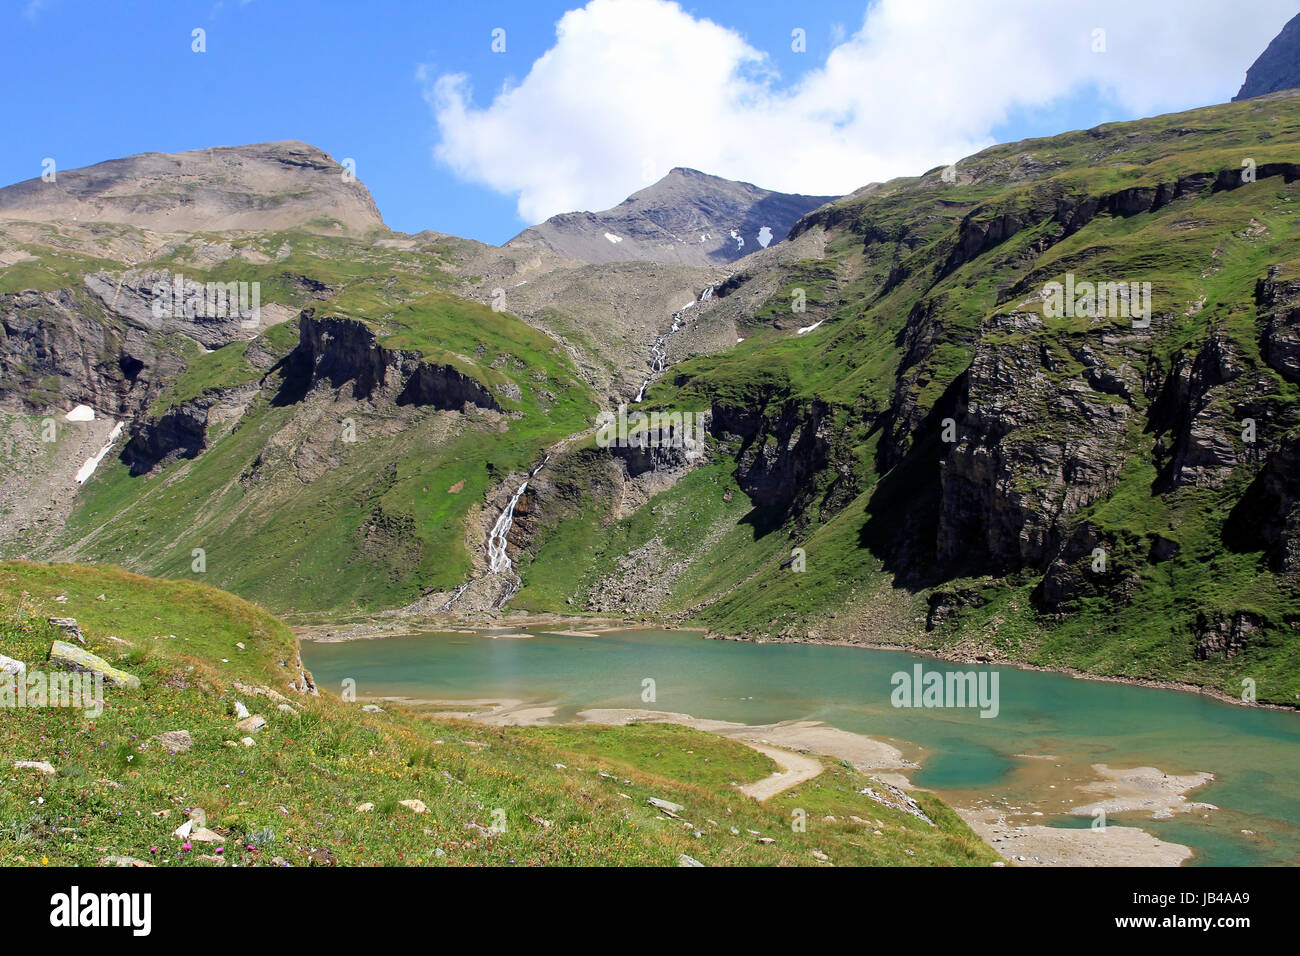 mountain scenery at the foot of the grossglockner Stock Photo